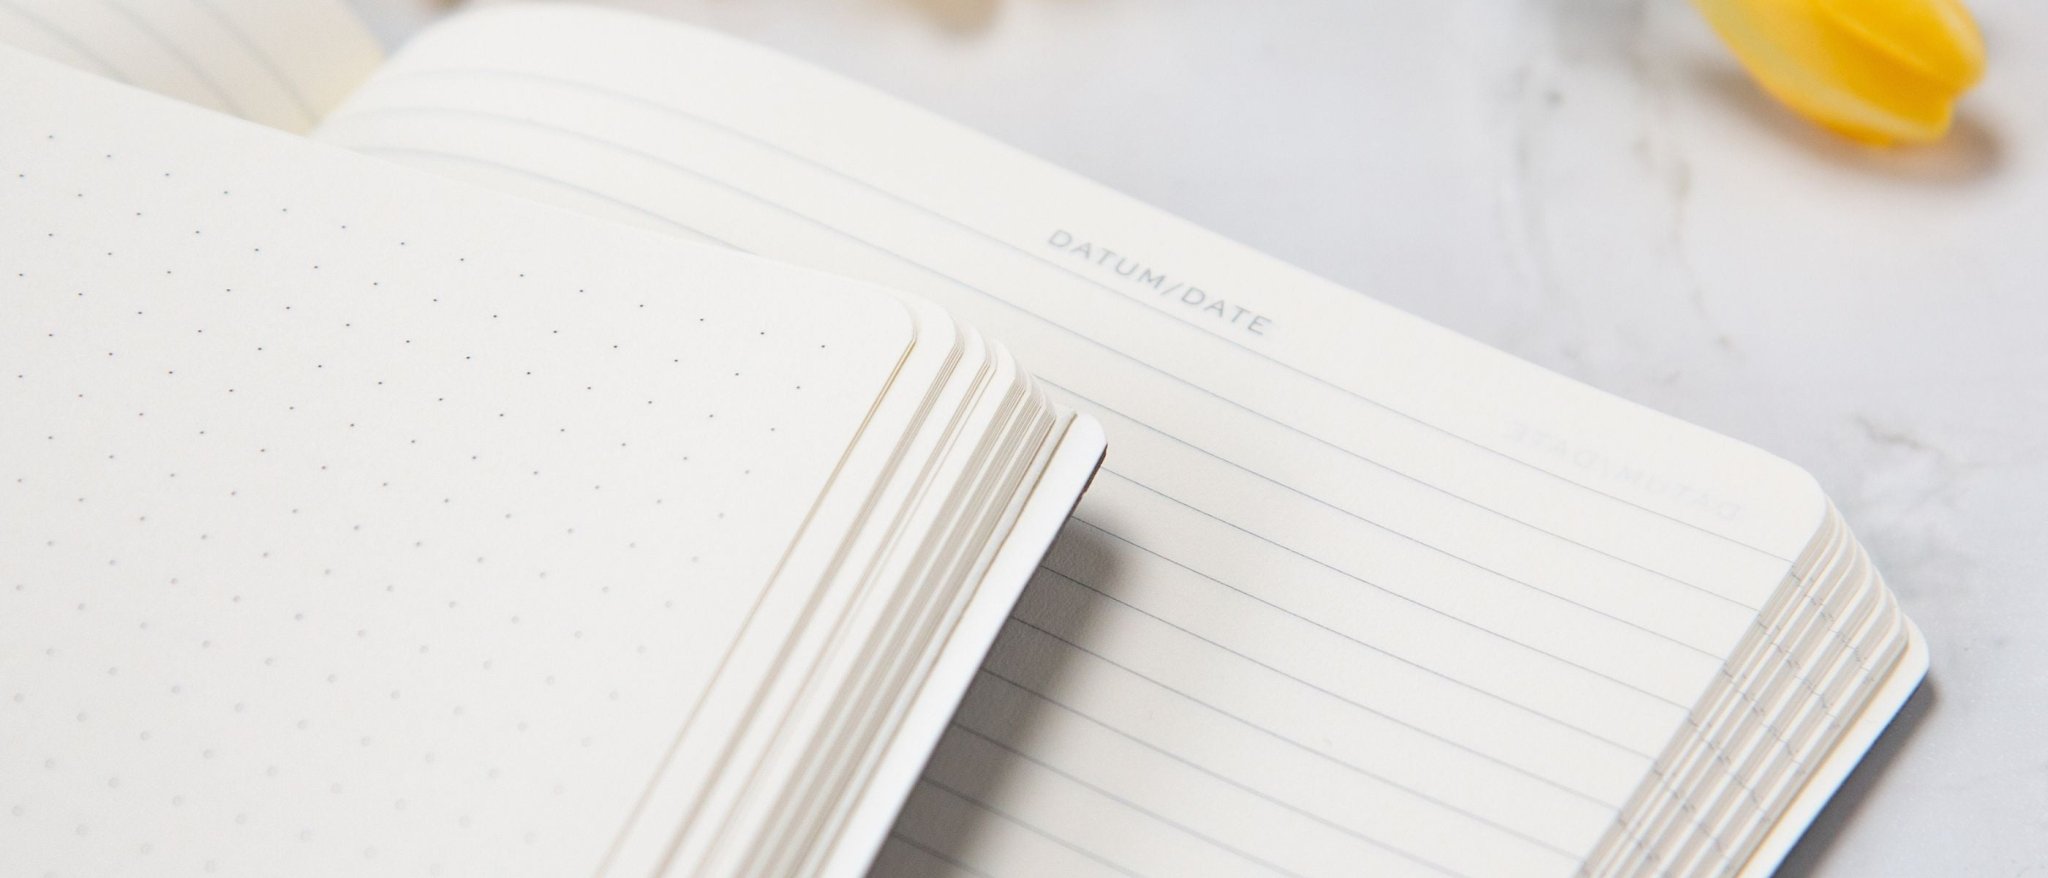 The Best Notebooks To Use For Bullet Journals